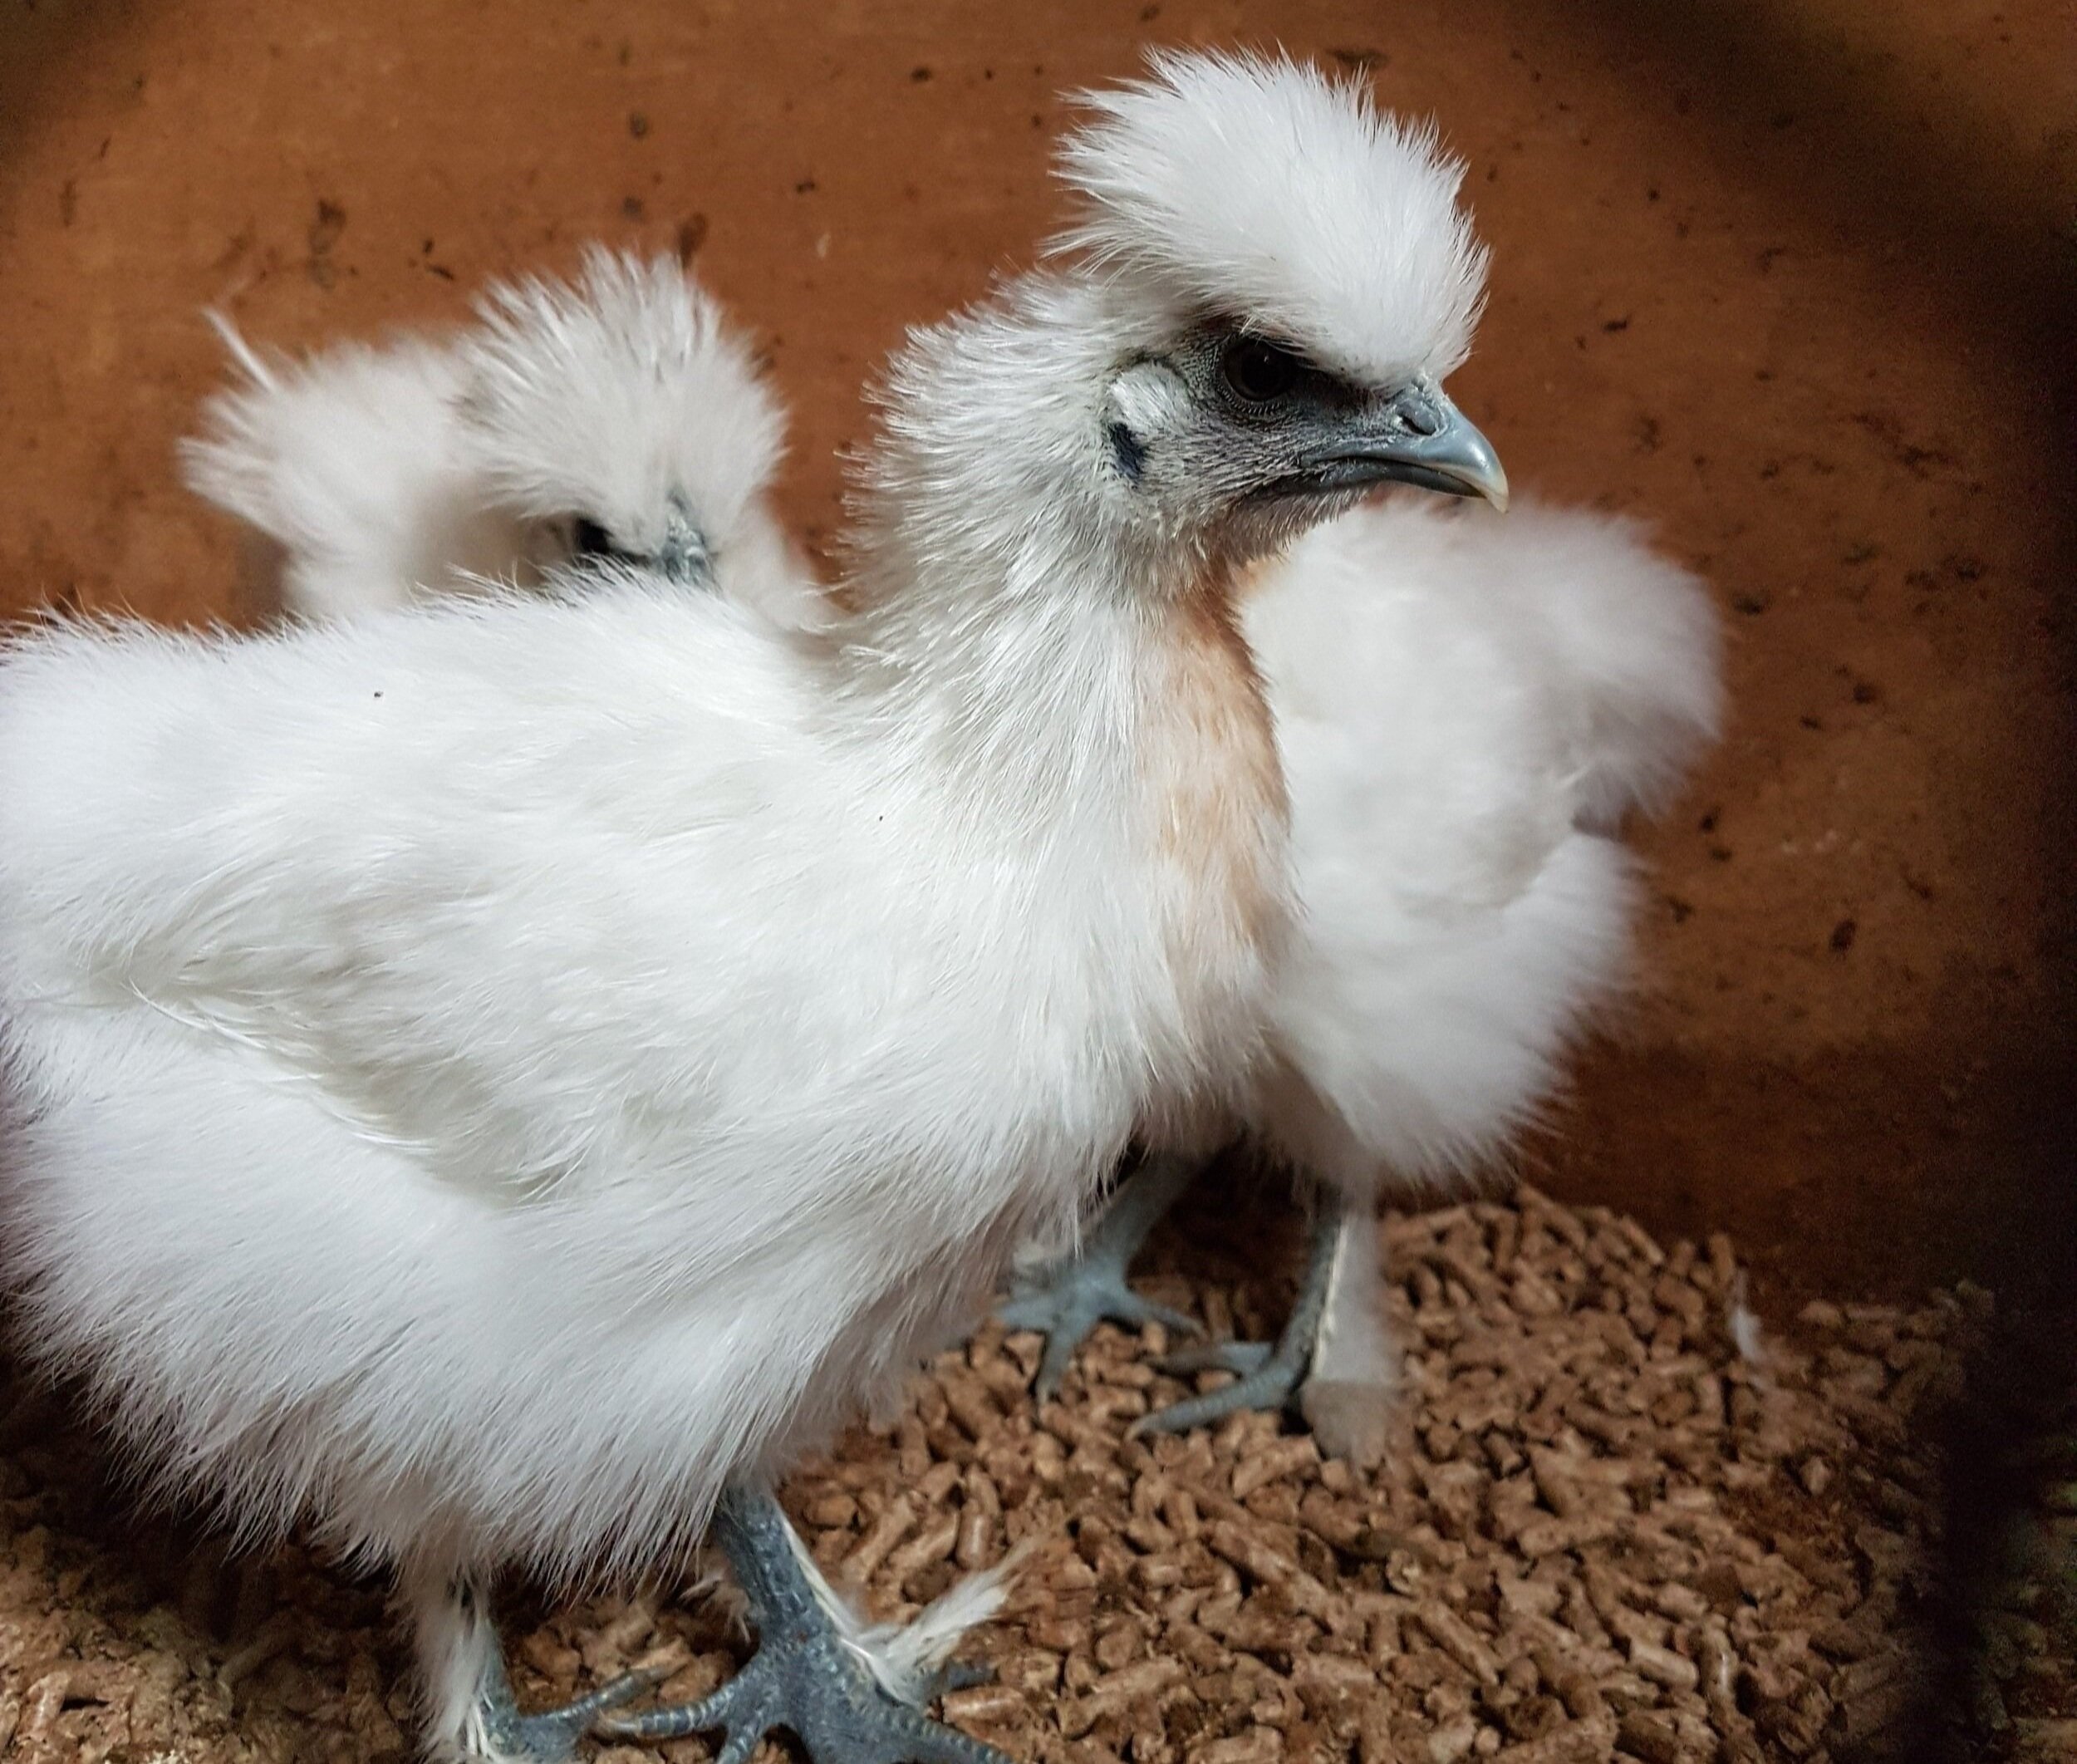 How To Sex Silkie Chickens — Brimwood Farm